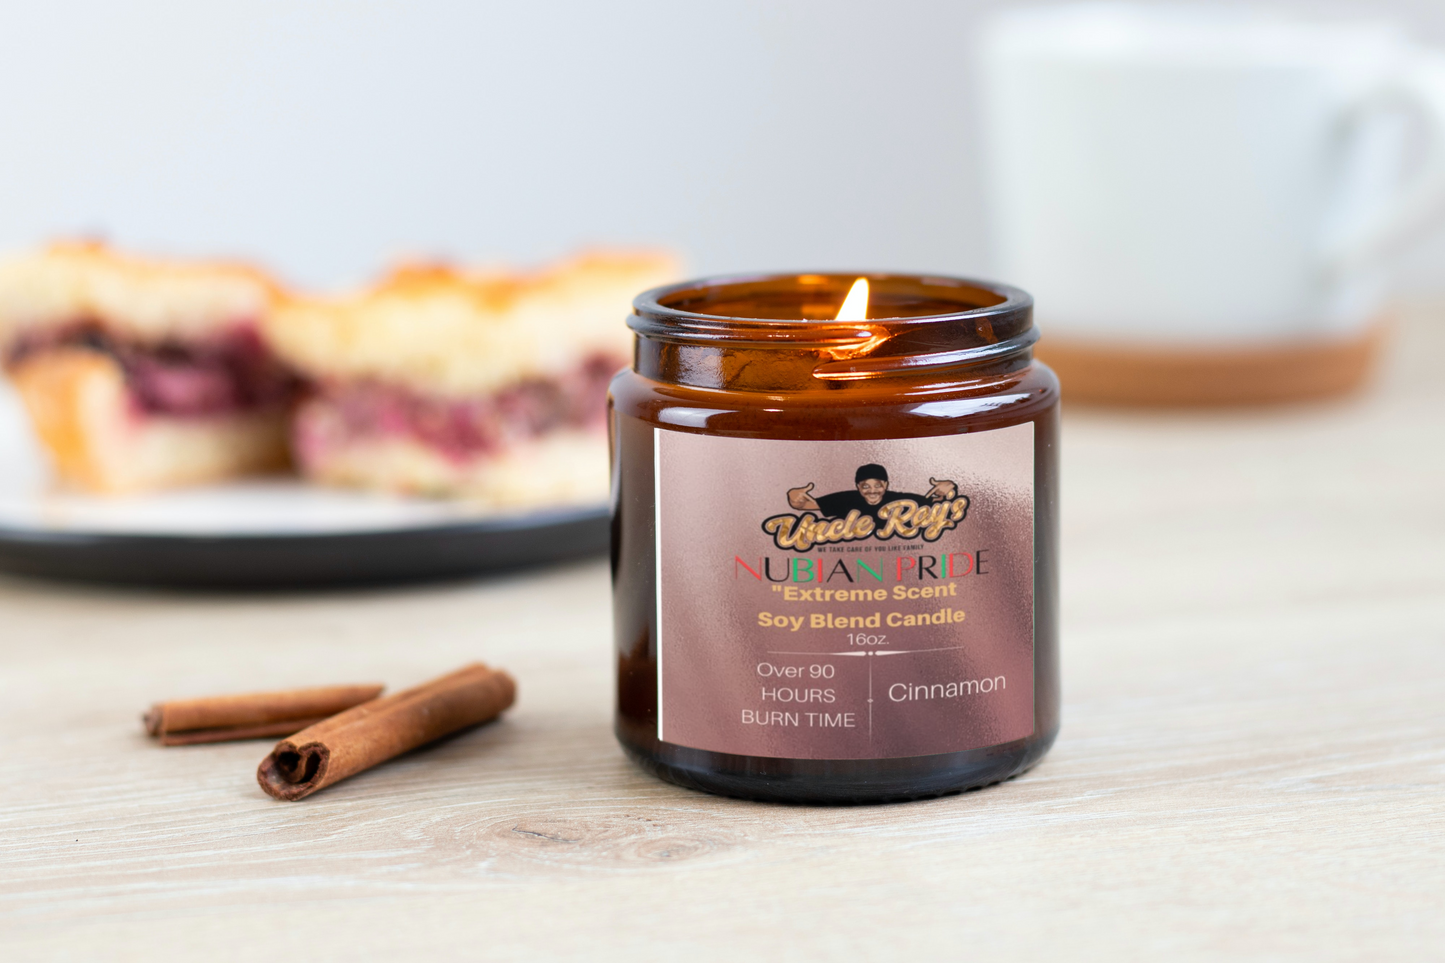 Uncle Ray's "Nubian Pride" Soy Blend Hand Poured Candle